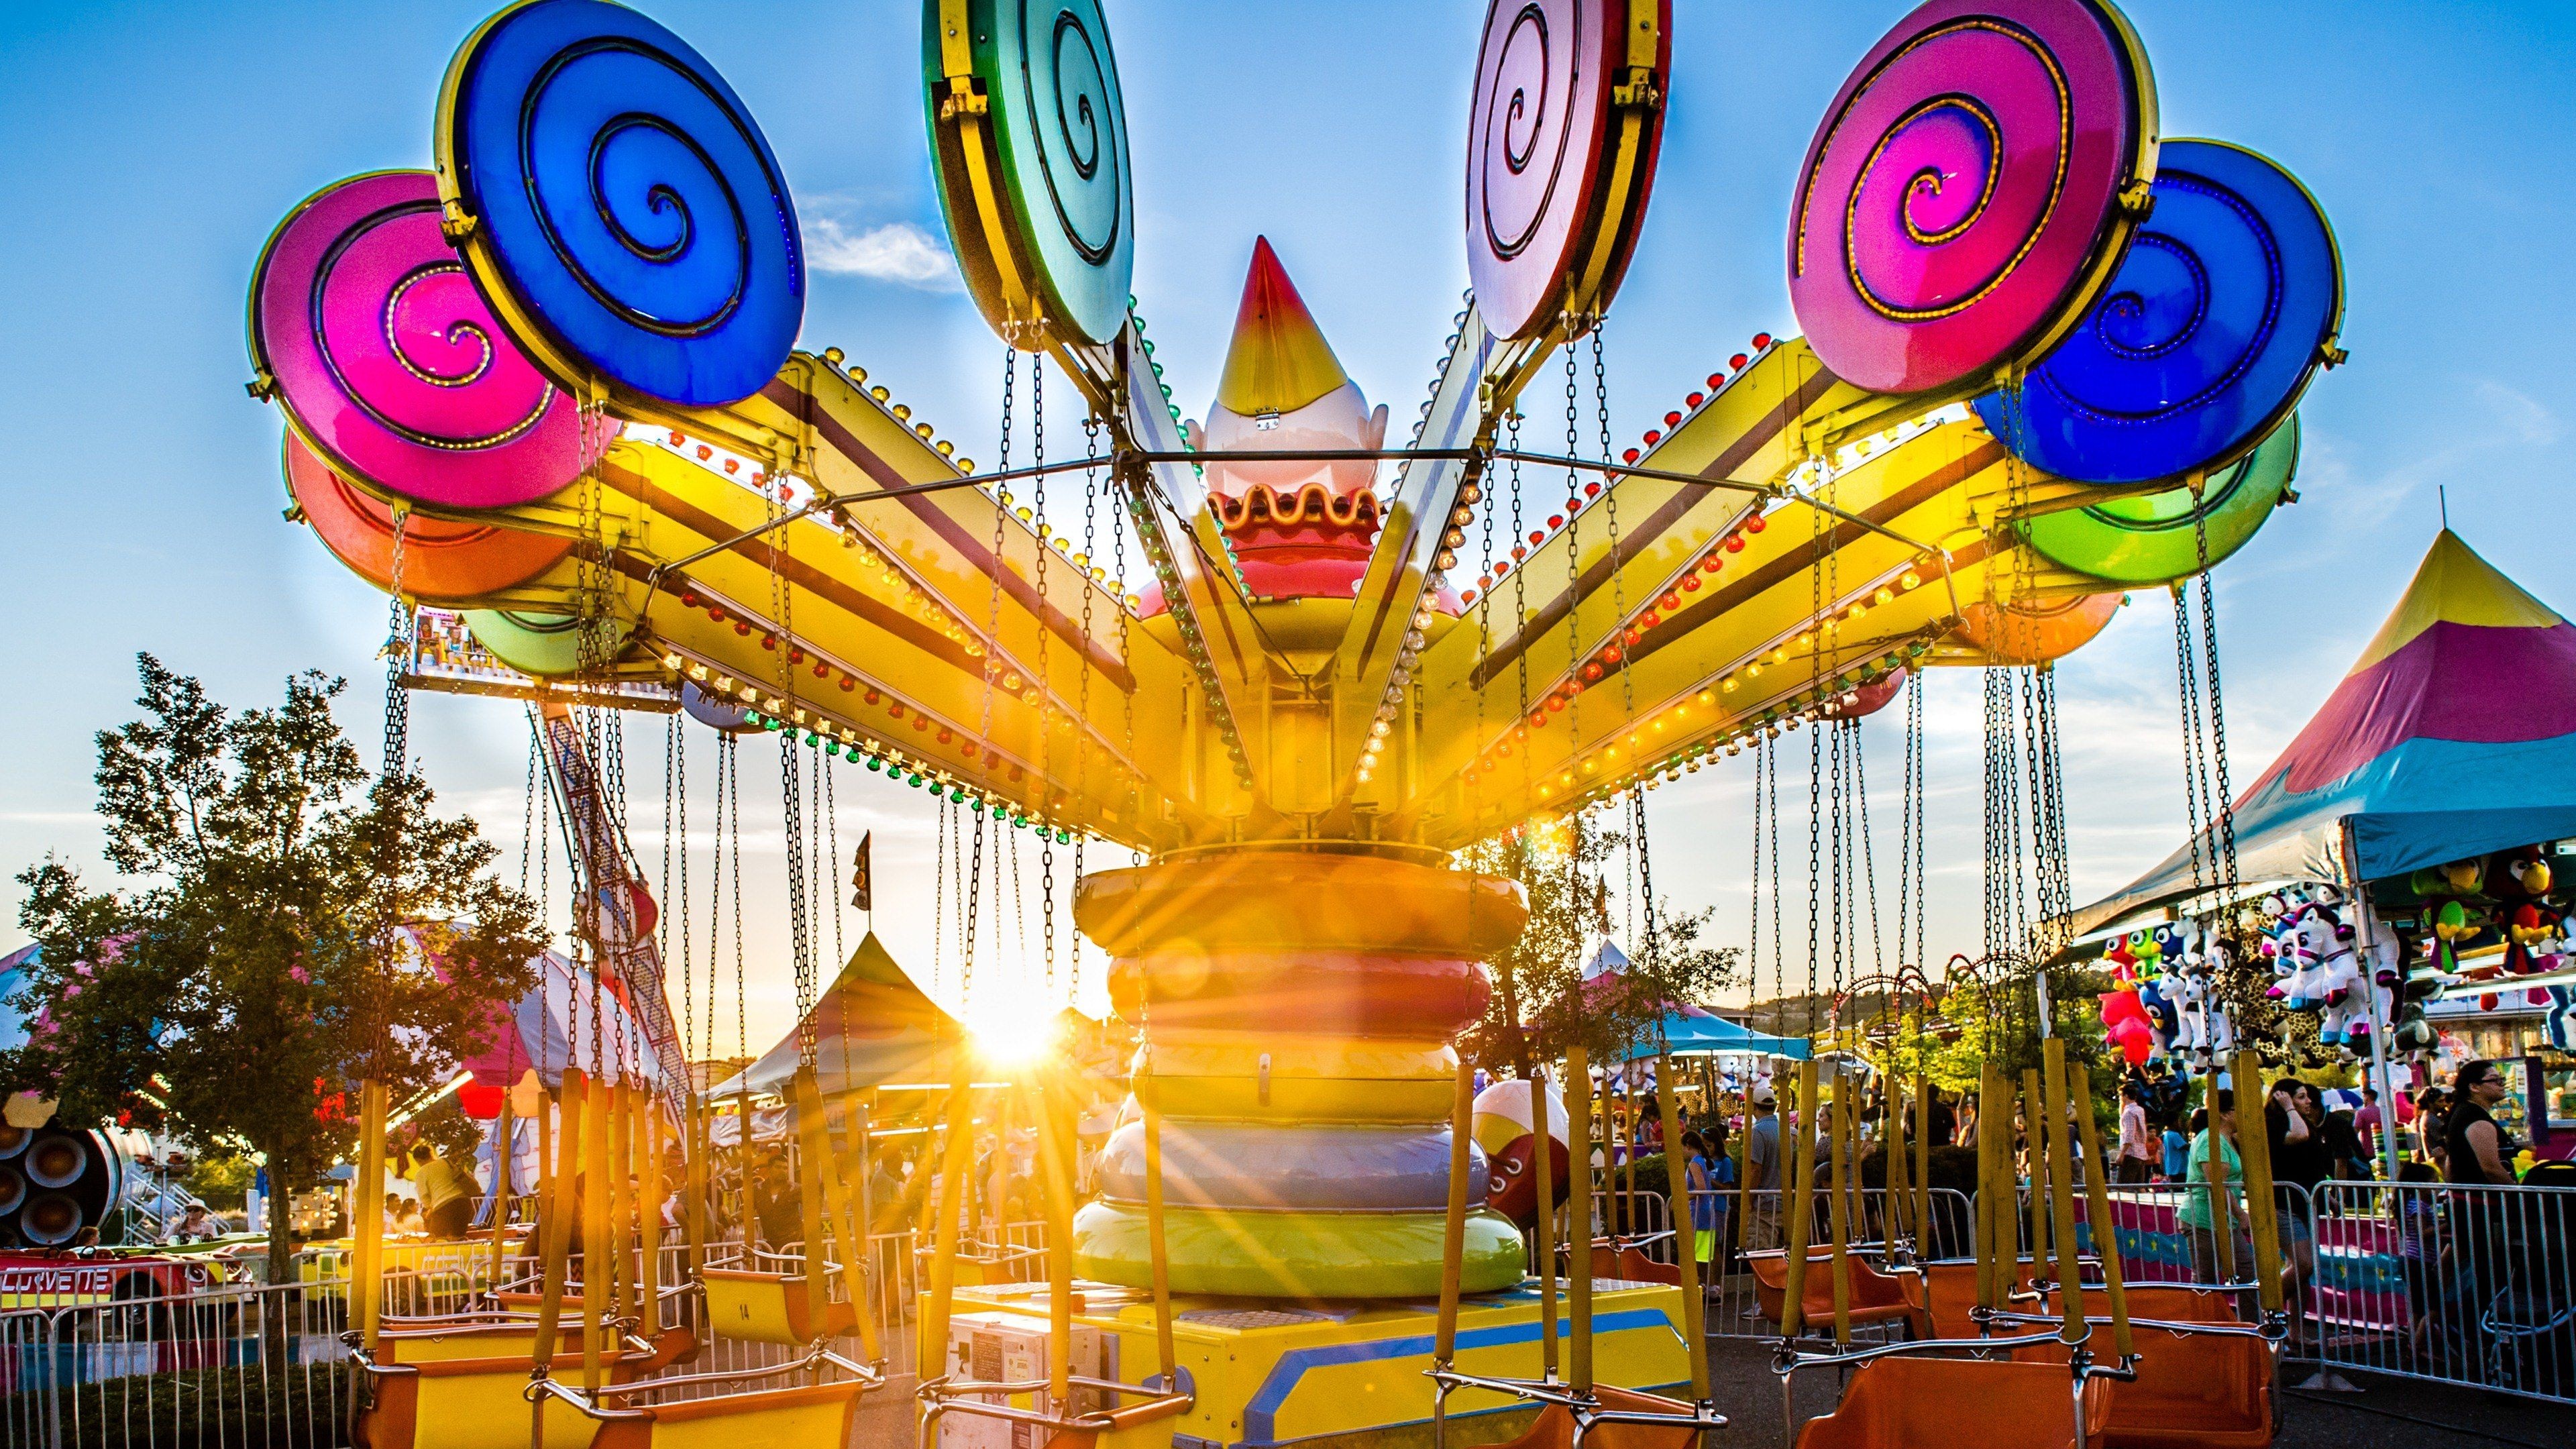 Fun Fair: Carnival made up of games of chance and skill, Swing ride. 3840x2160 4K Background.